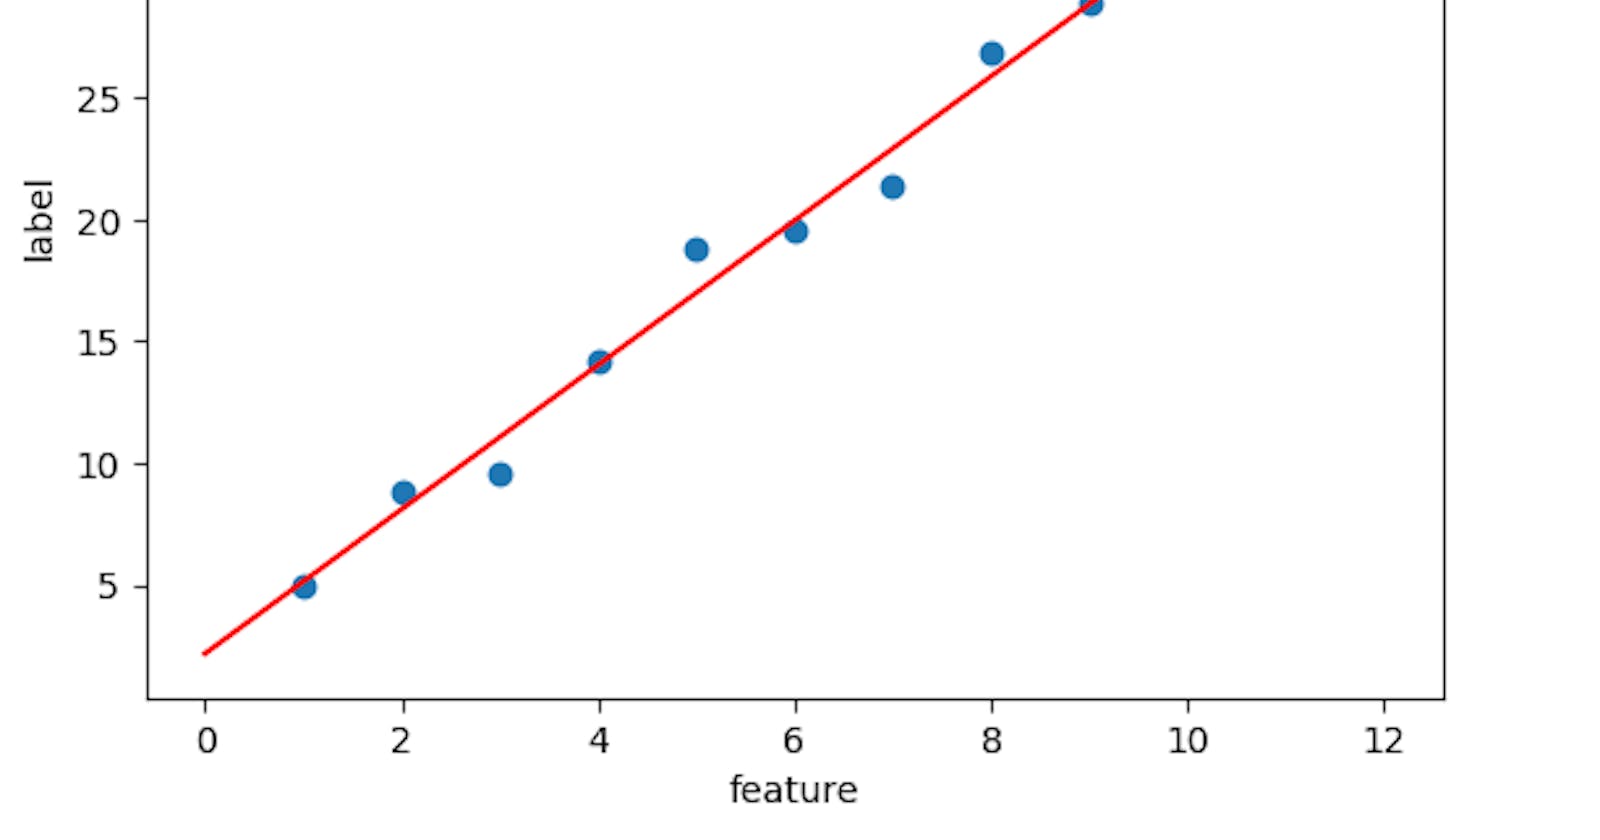 A Guide for Hyperparameter Tuning